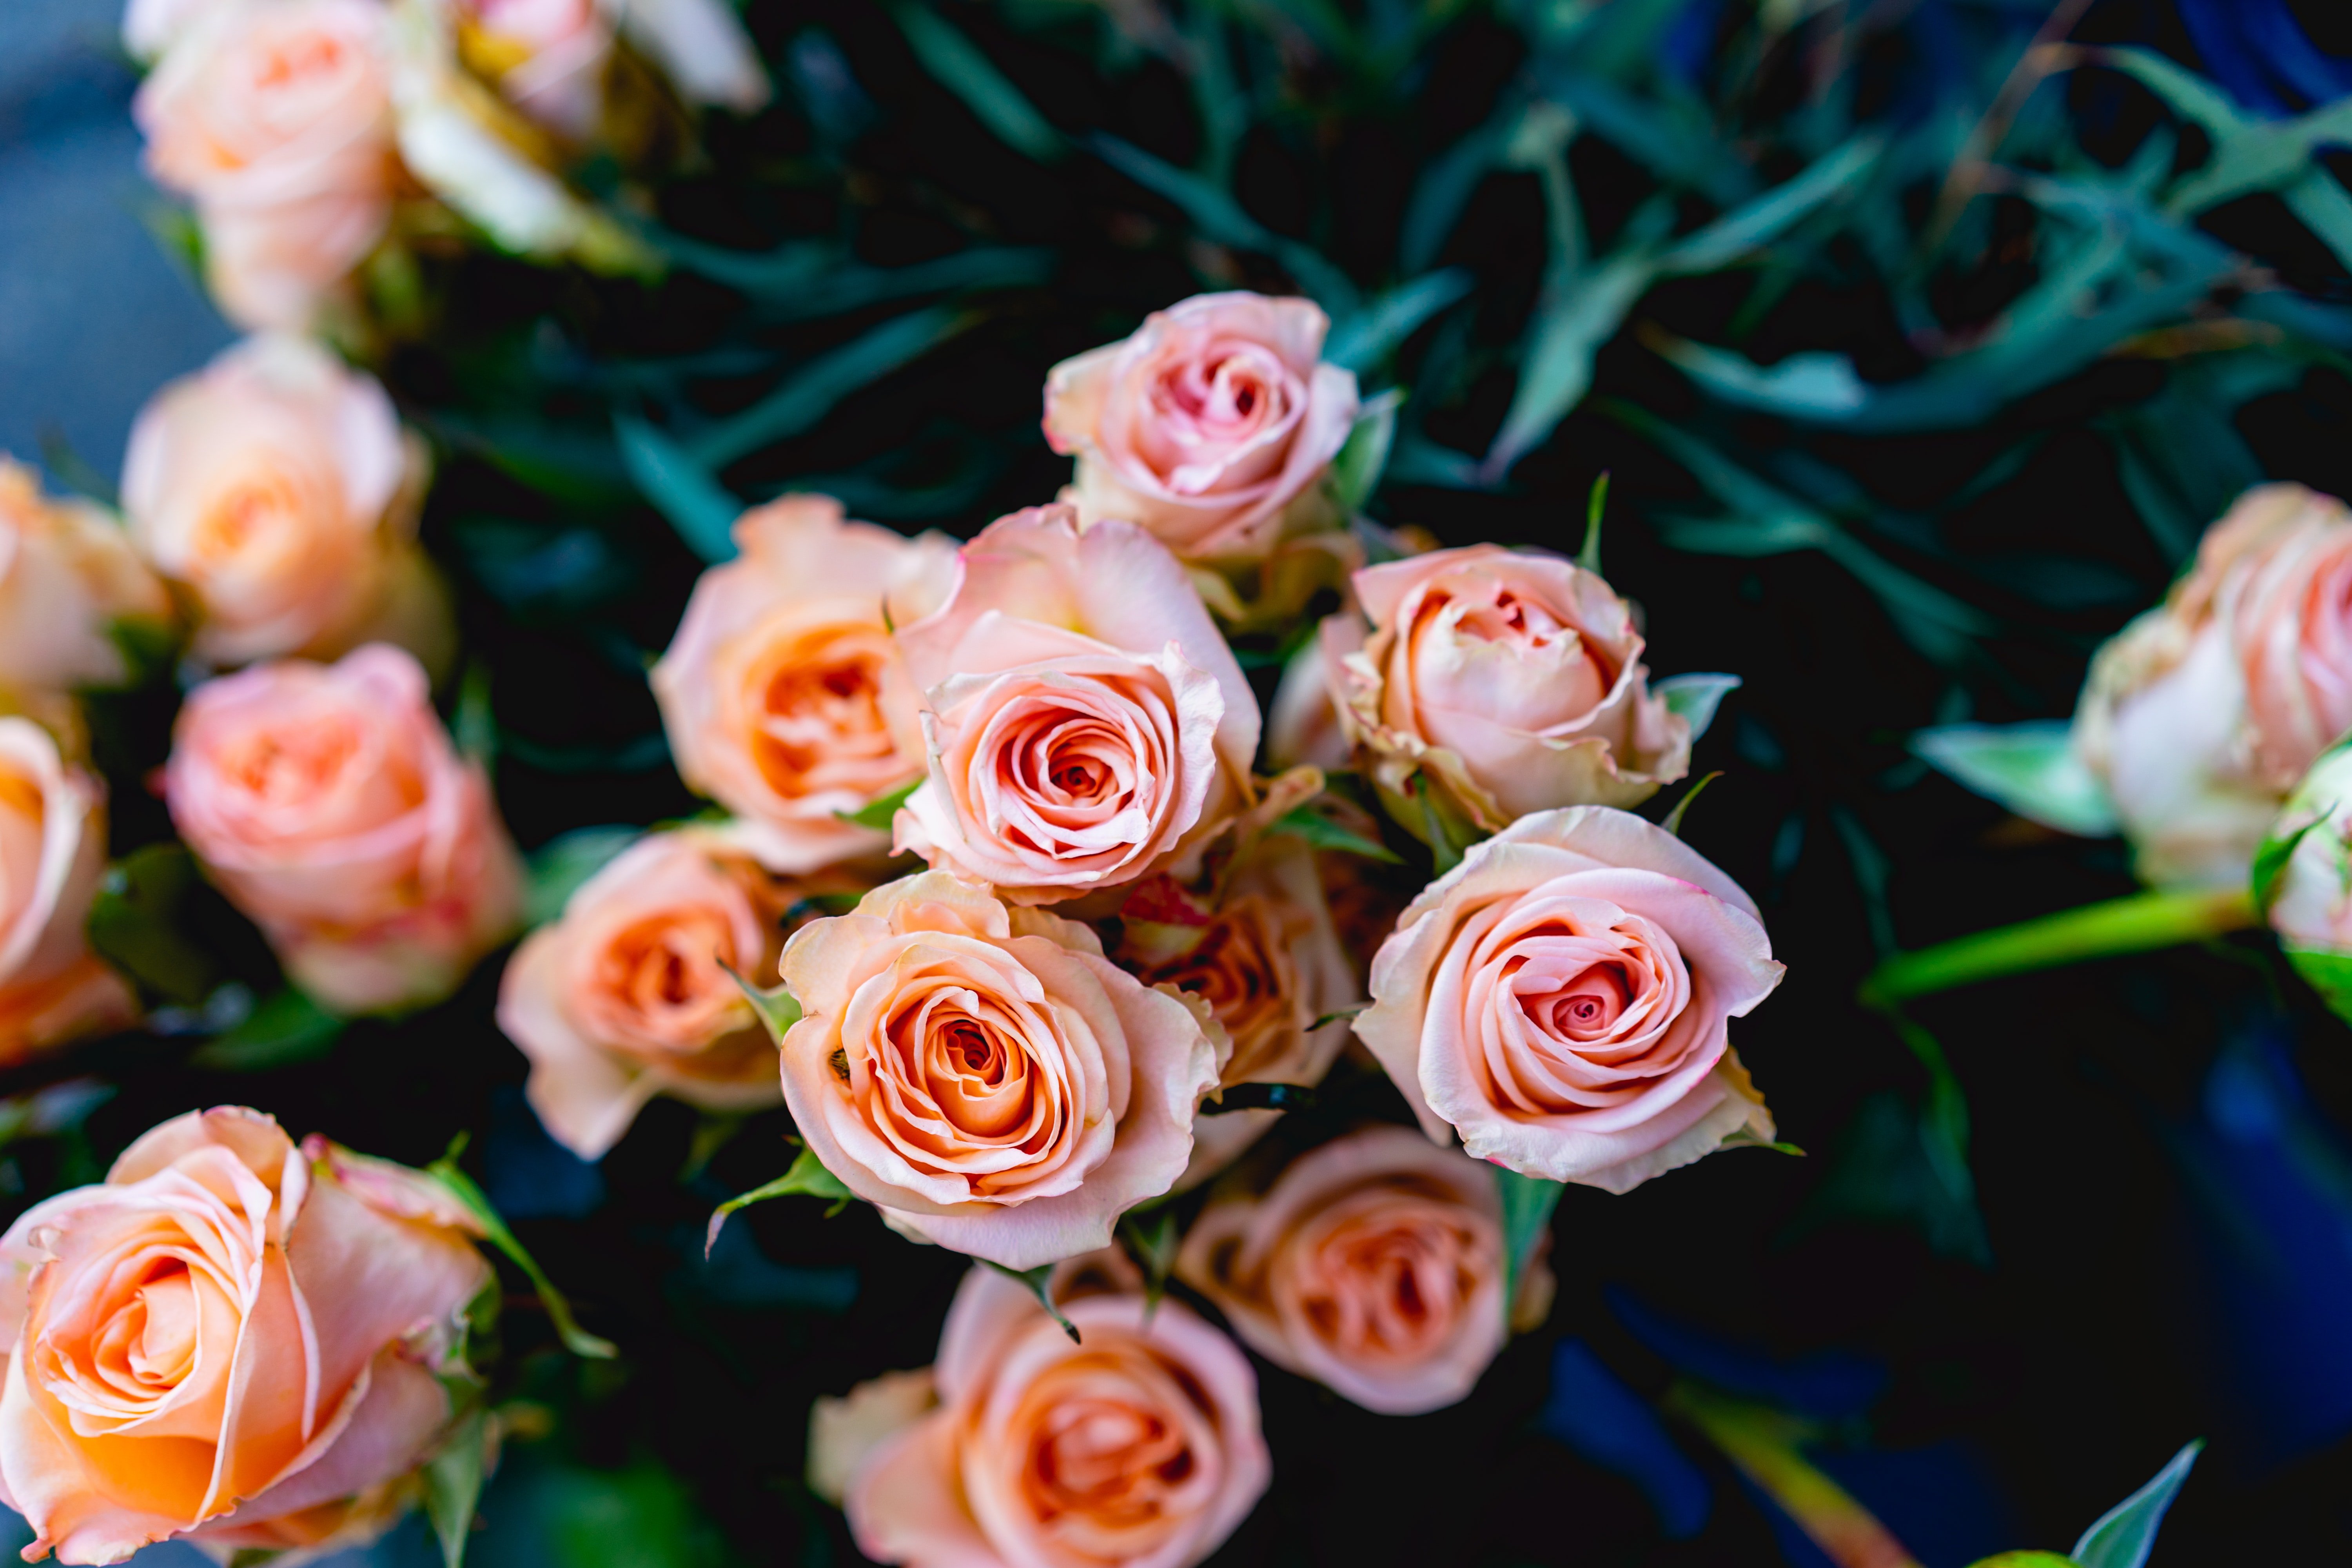 Agatha apologized to Abby & shared the details of the seller who sold the gorgeous roses. | Source: Unsplash